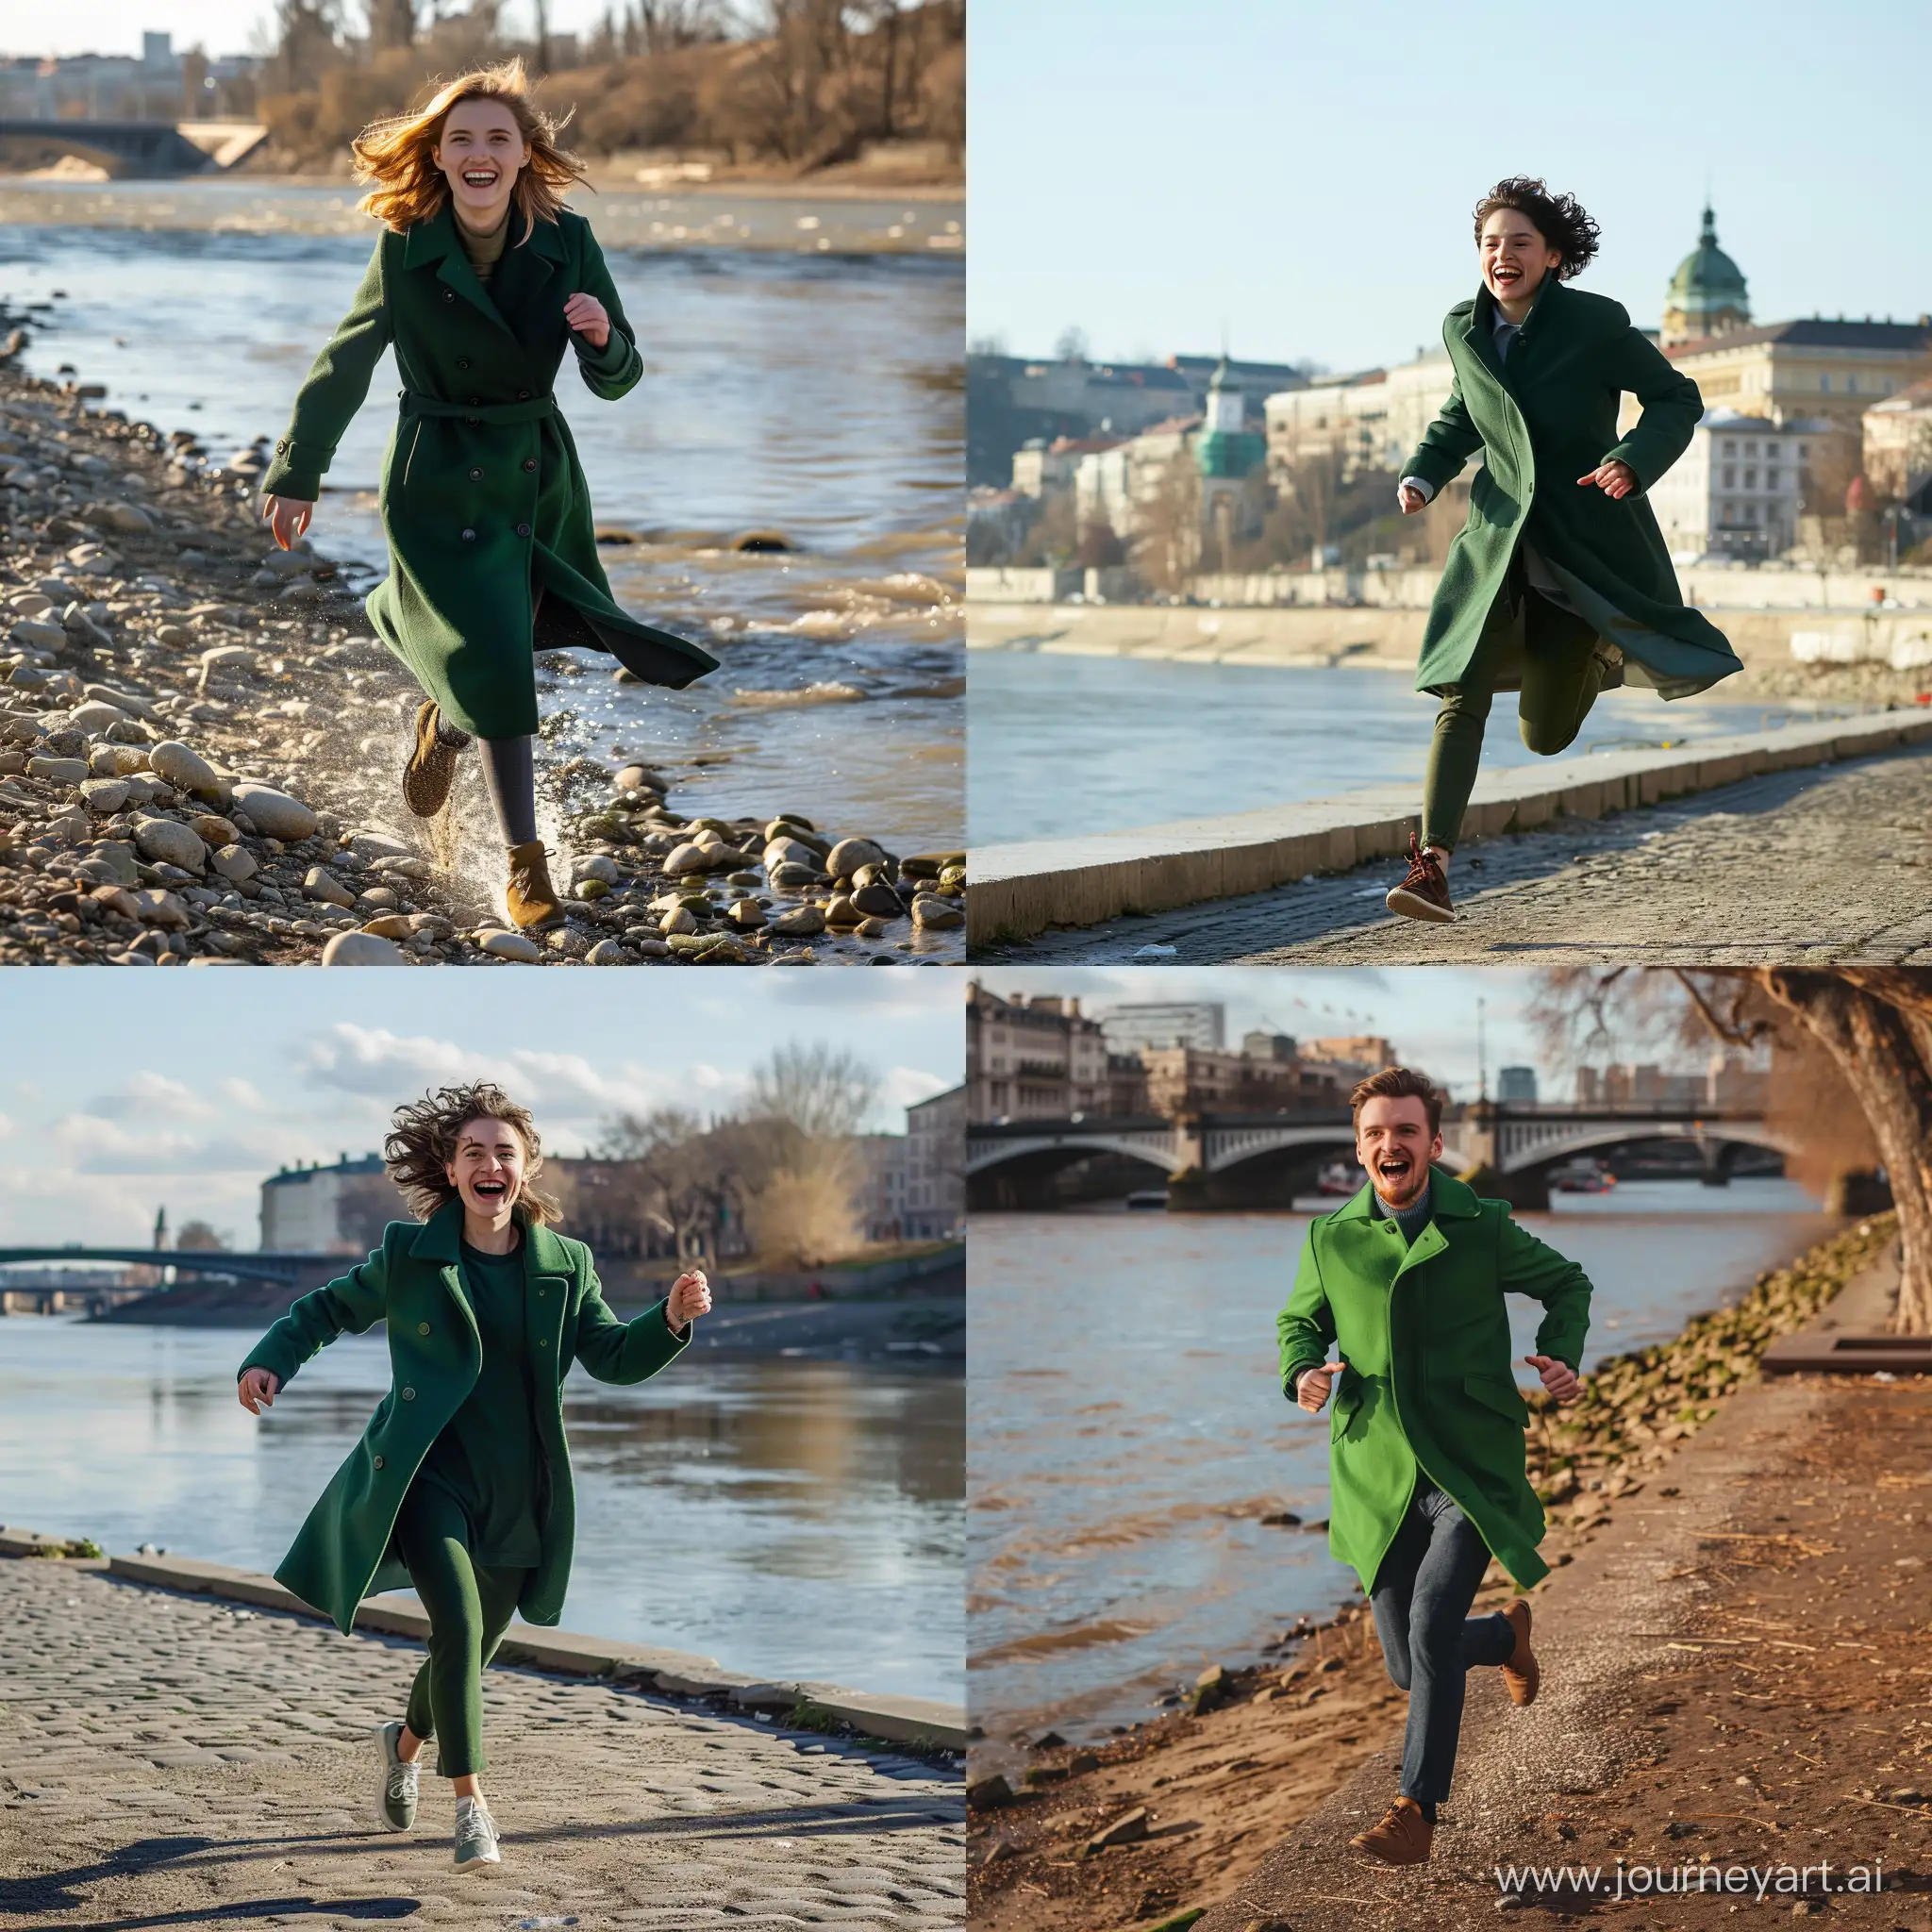 Cheerful-Student-Running-Along-Riverbank-in-Green-Coat